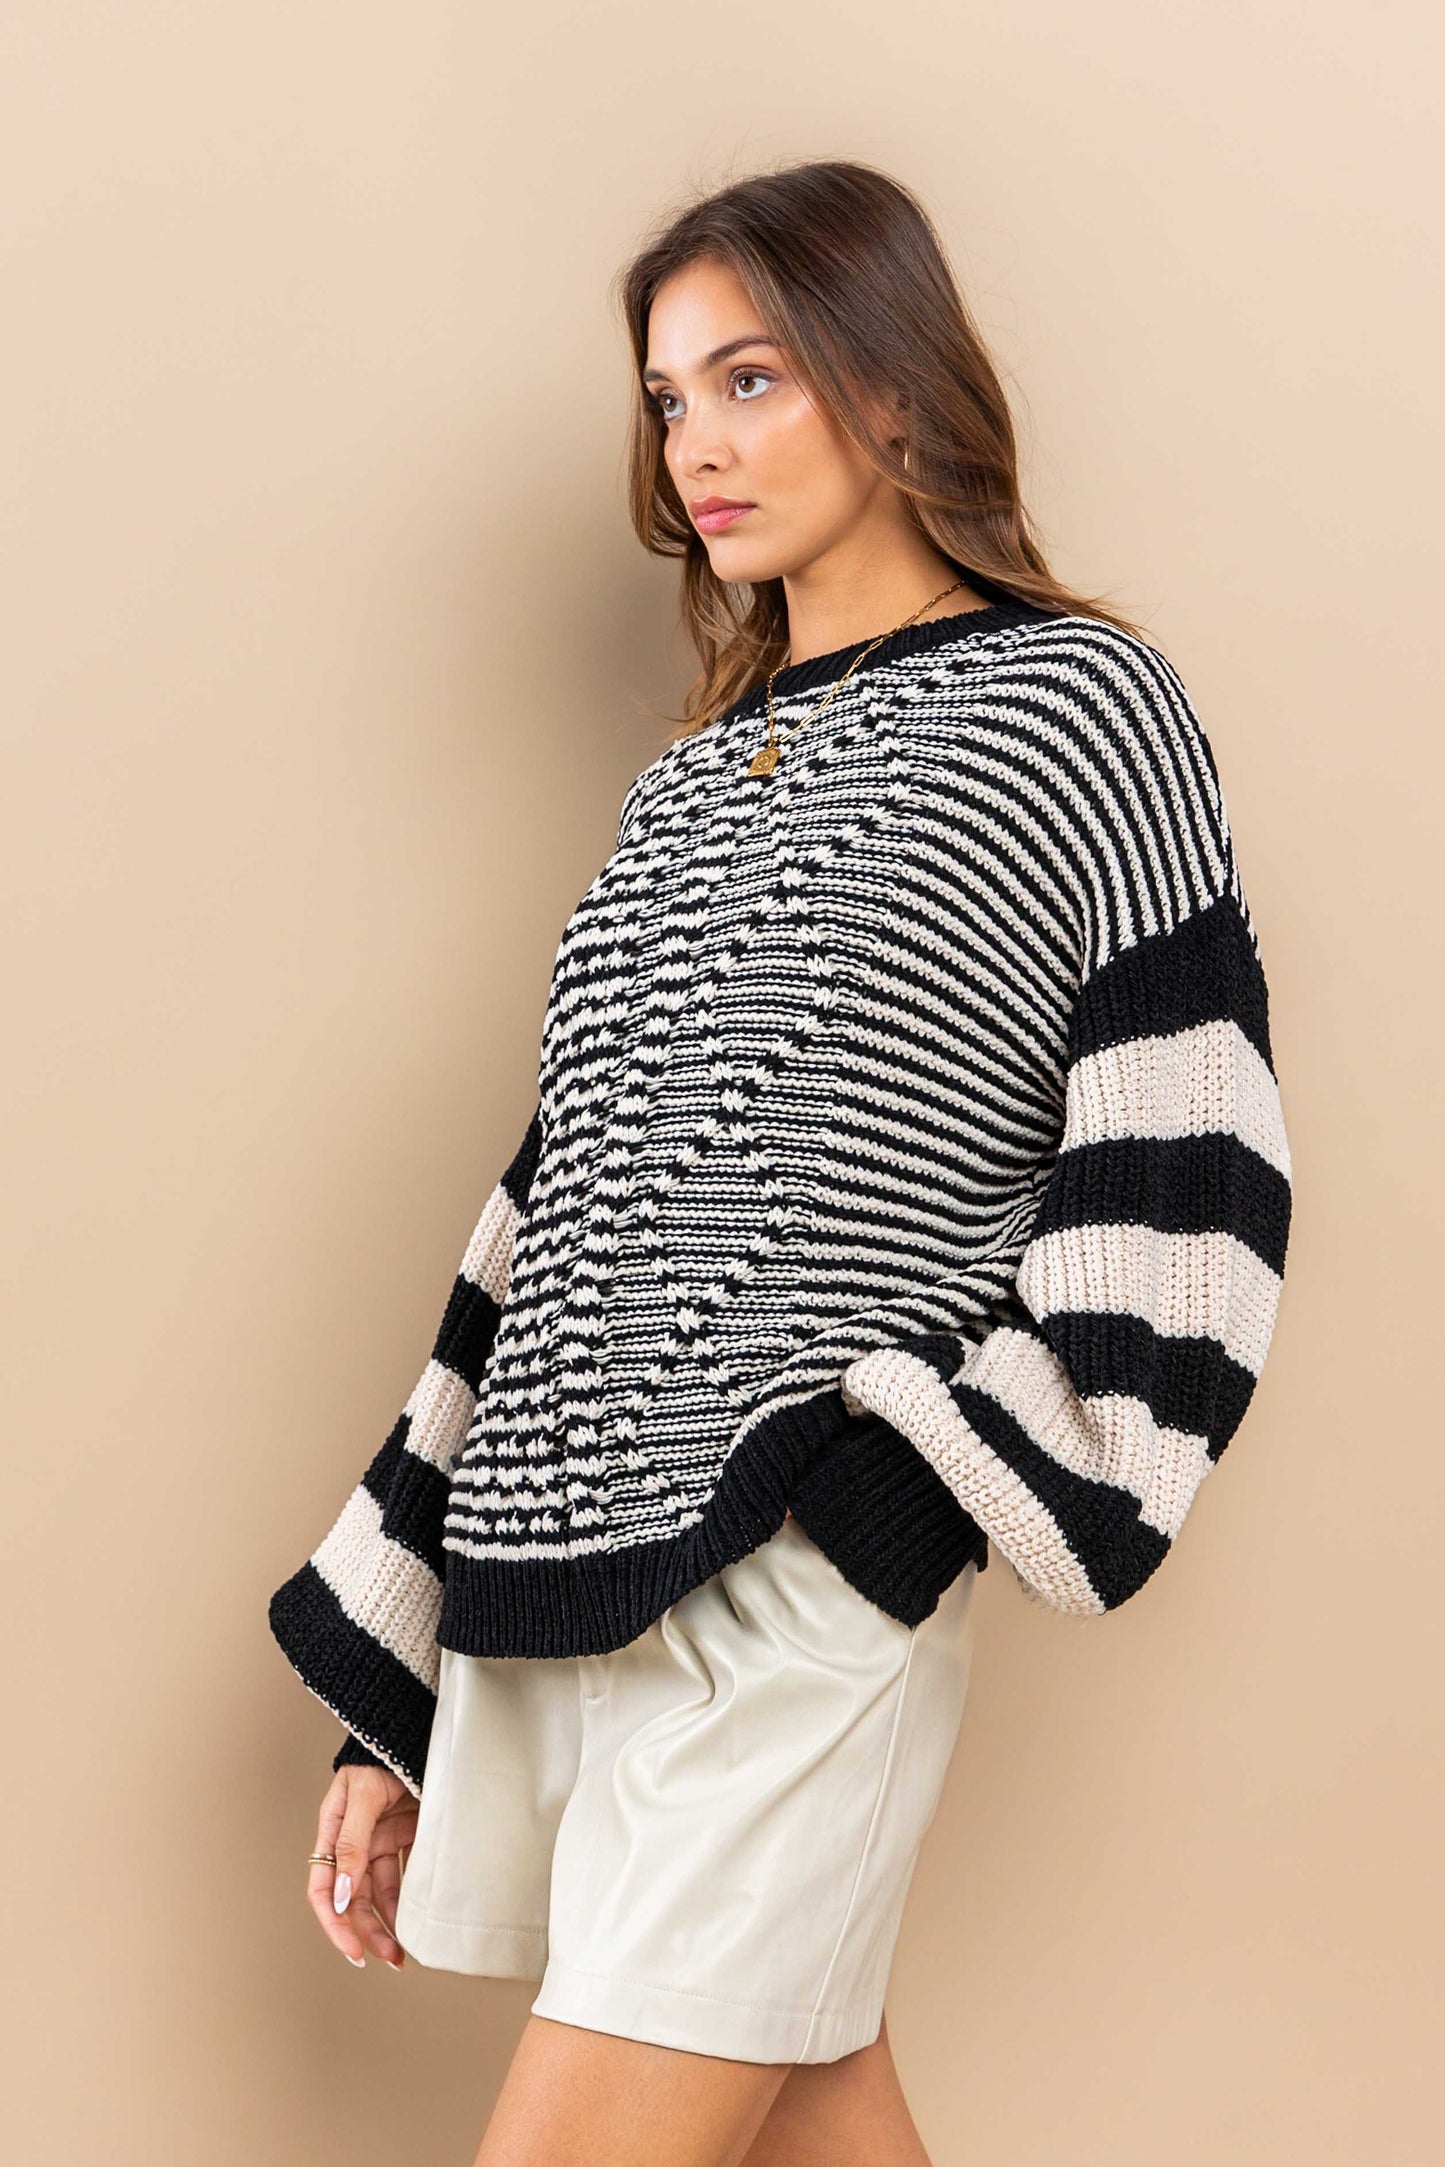 Giselle Sweater